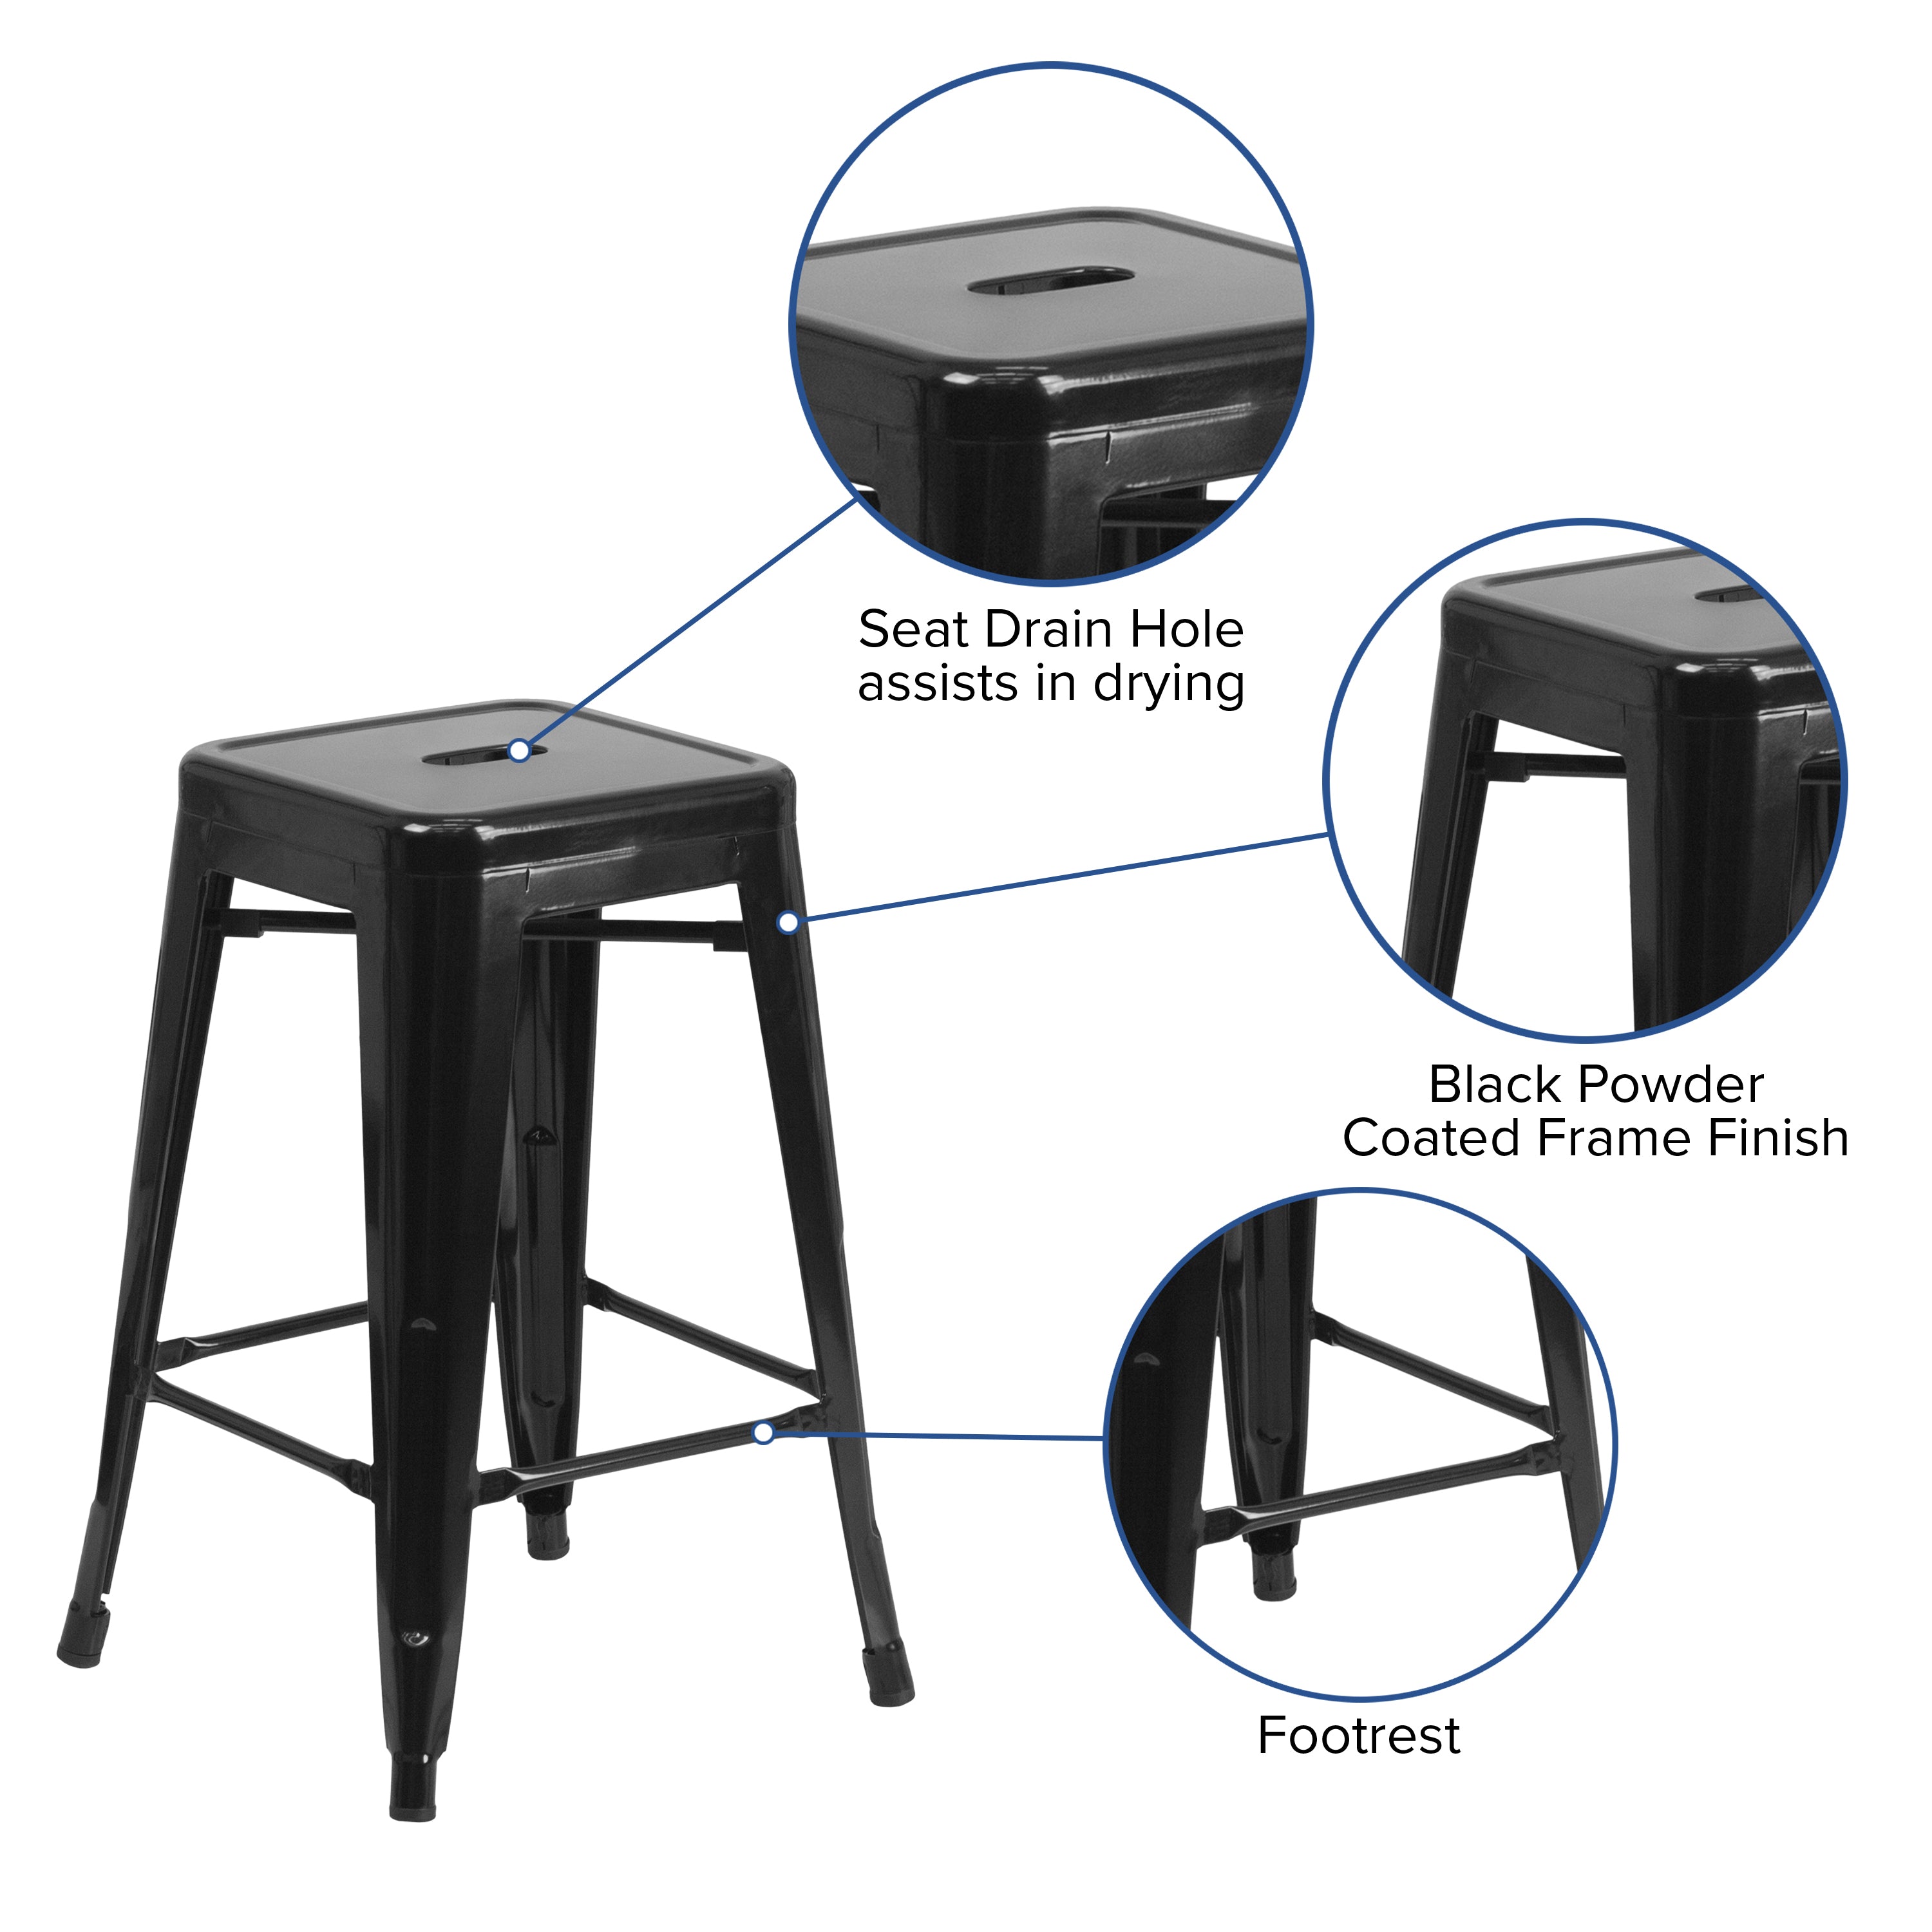 Commercial Grade 24" High Backless Metal Indoor-Outdoor Counter Height Stool with Square Seat-Indoor/Outdoor Bar Stool-Flash Furniture-Wall2Wall Furnishings